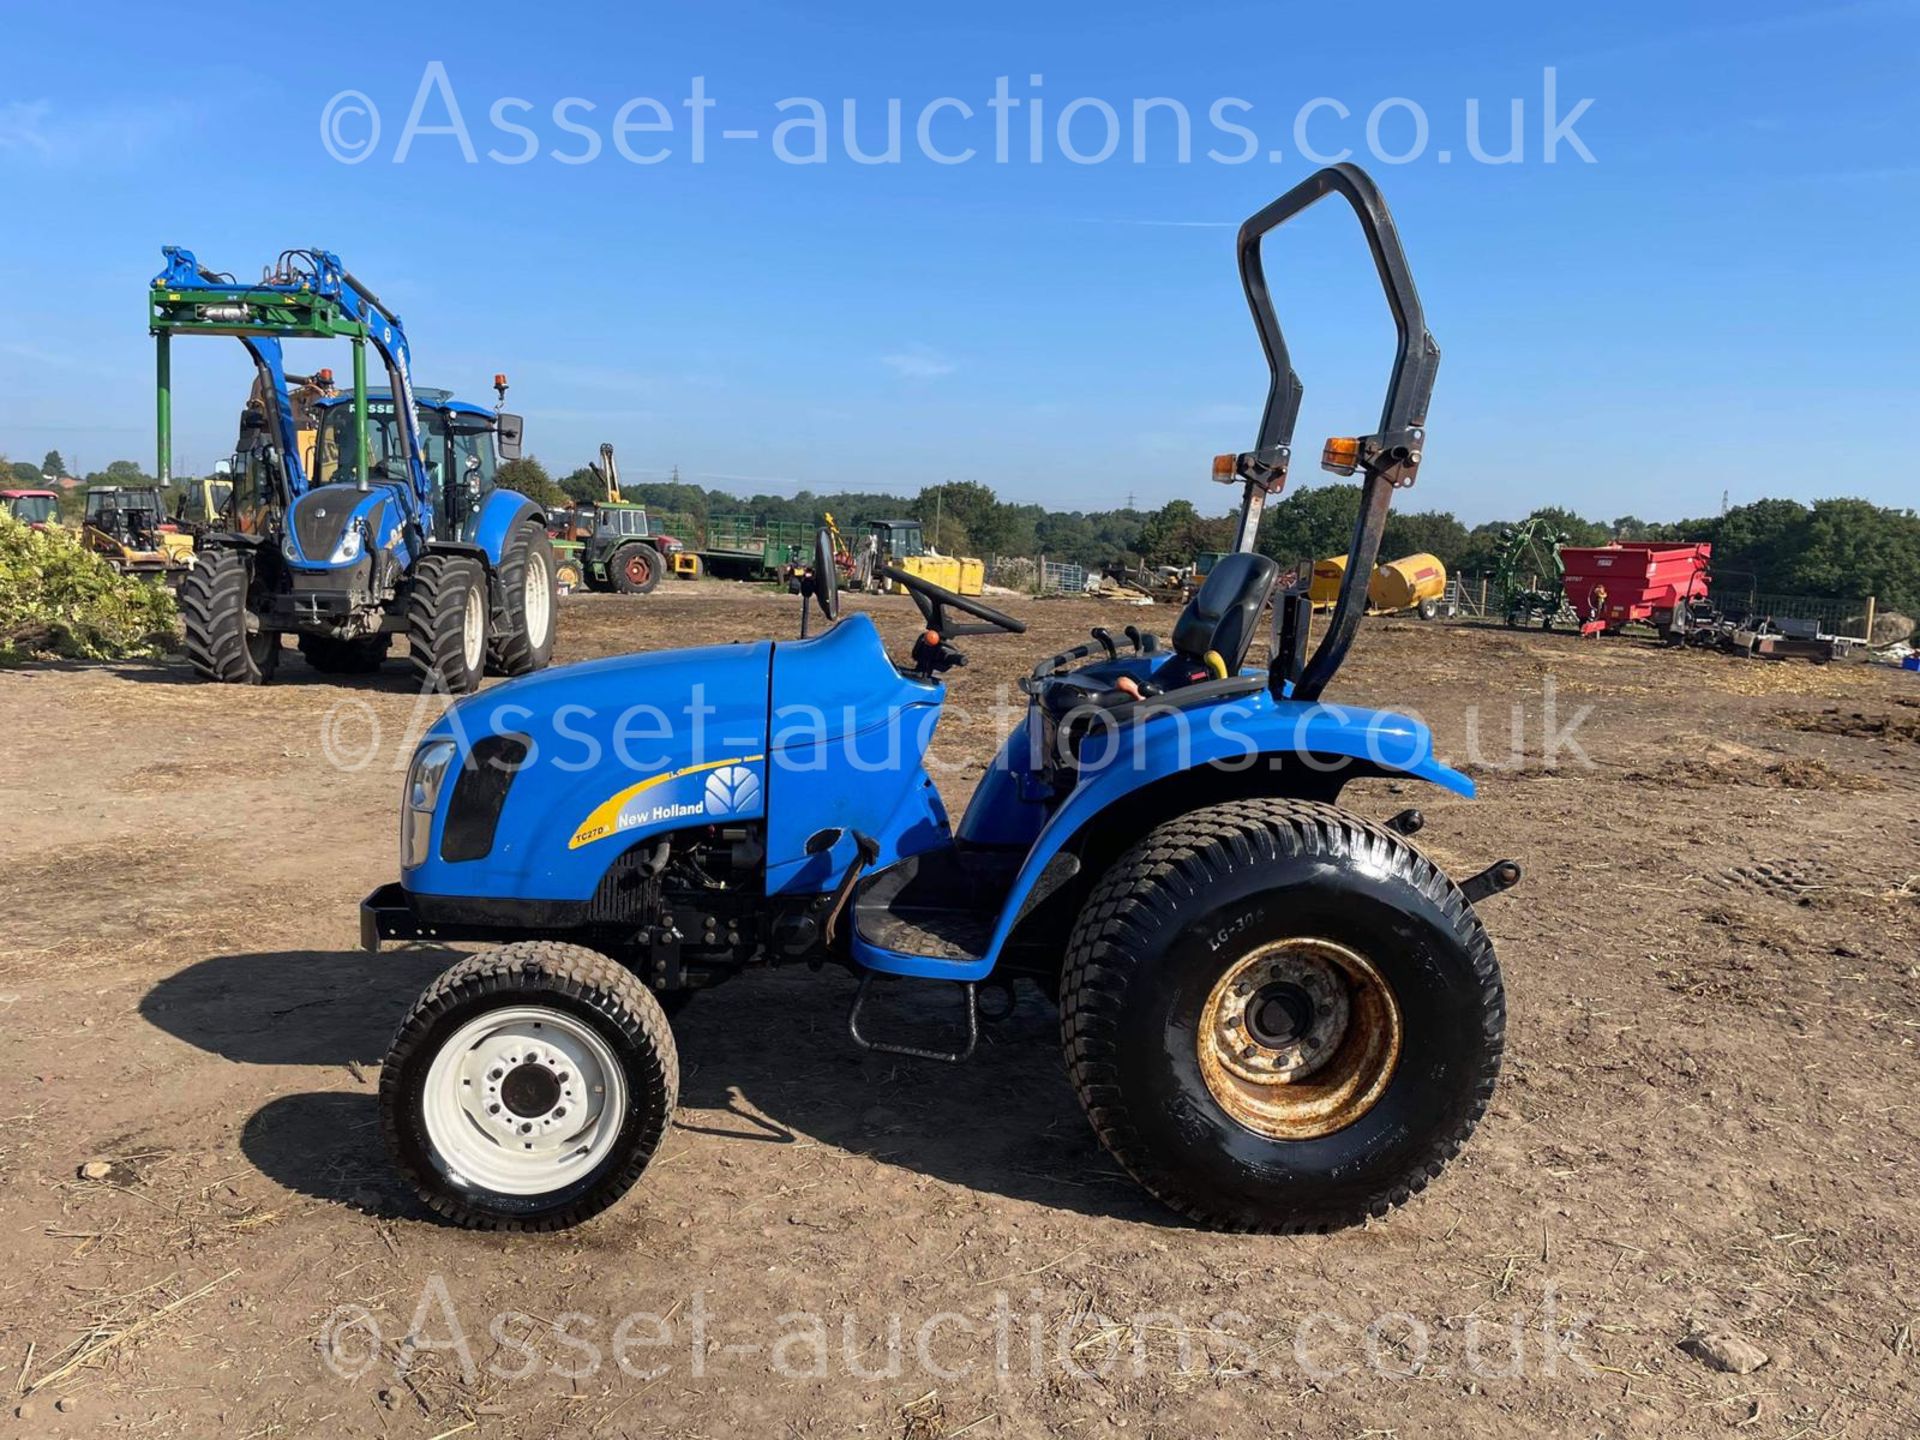 2005 NEW HOLLAND TC27DA 27hp 4WD COMPACT TRACTOR, RUNS DRIVES AND WORKS WELL, ROAD REGISTERED - Image 7 of 26